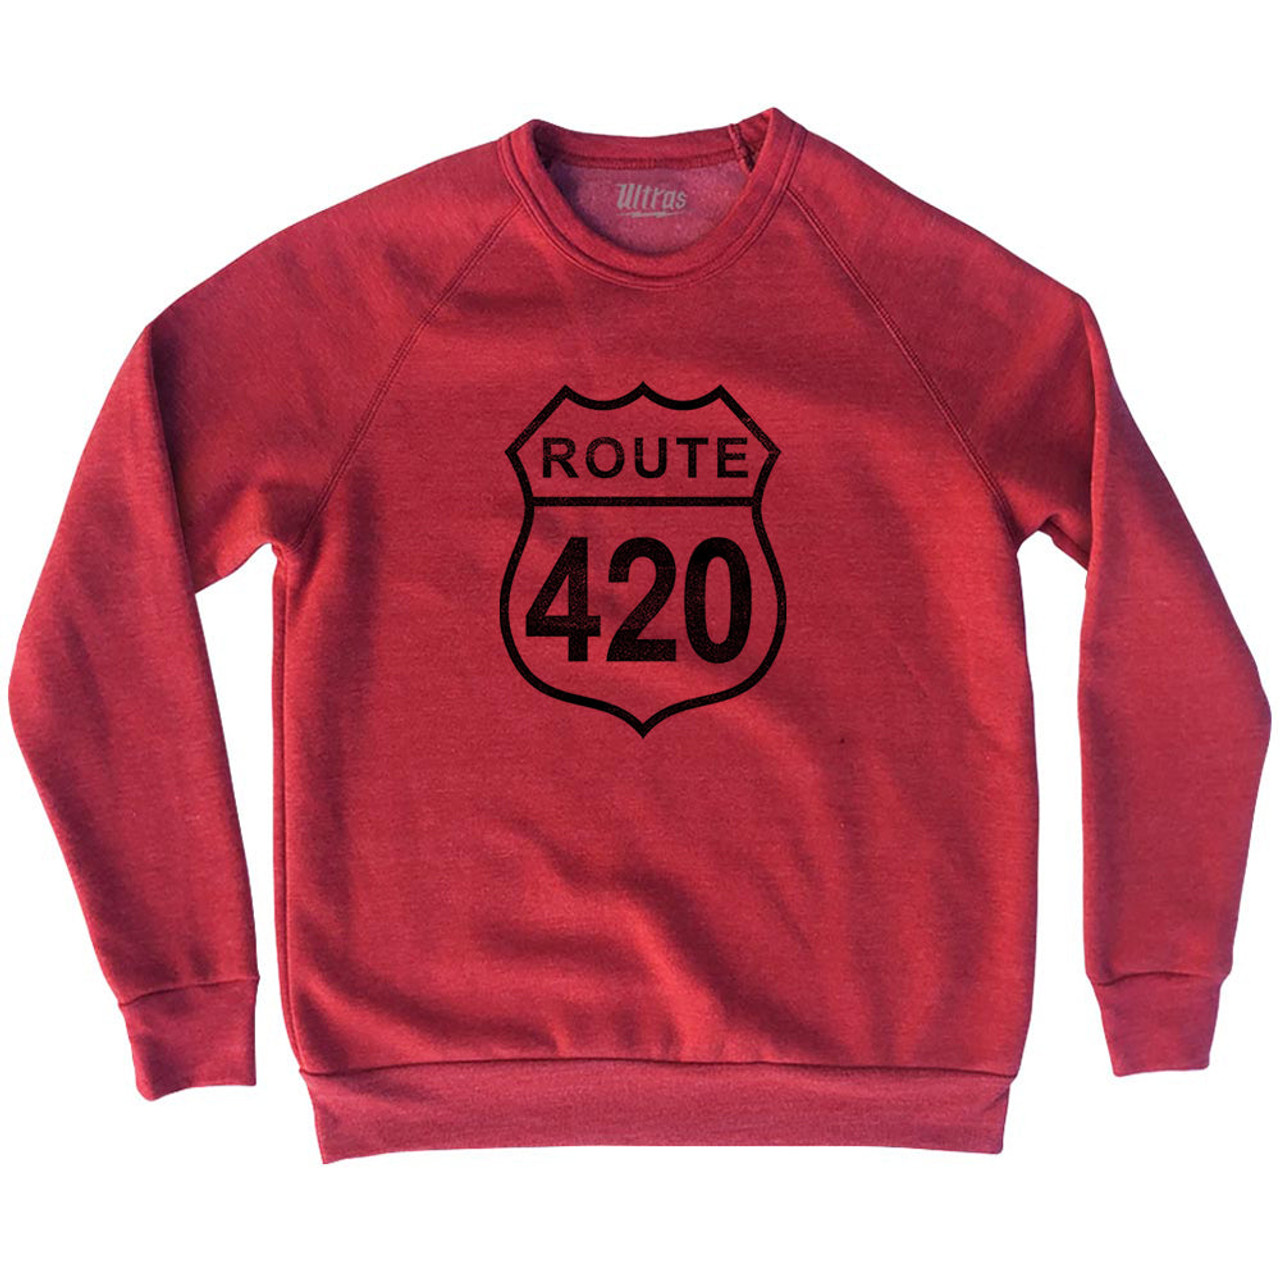 Route 420 Adult Tri-Blend Sweatshirt - Red Heather